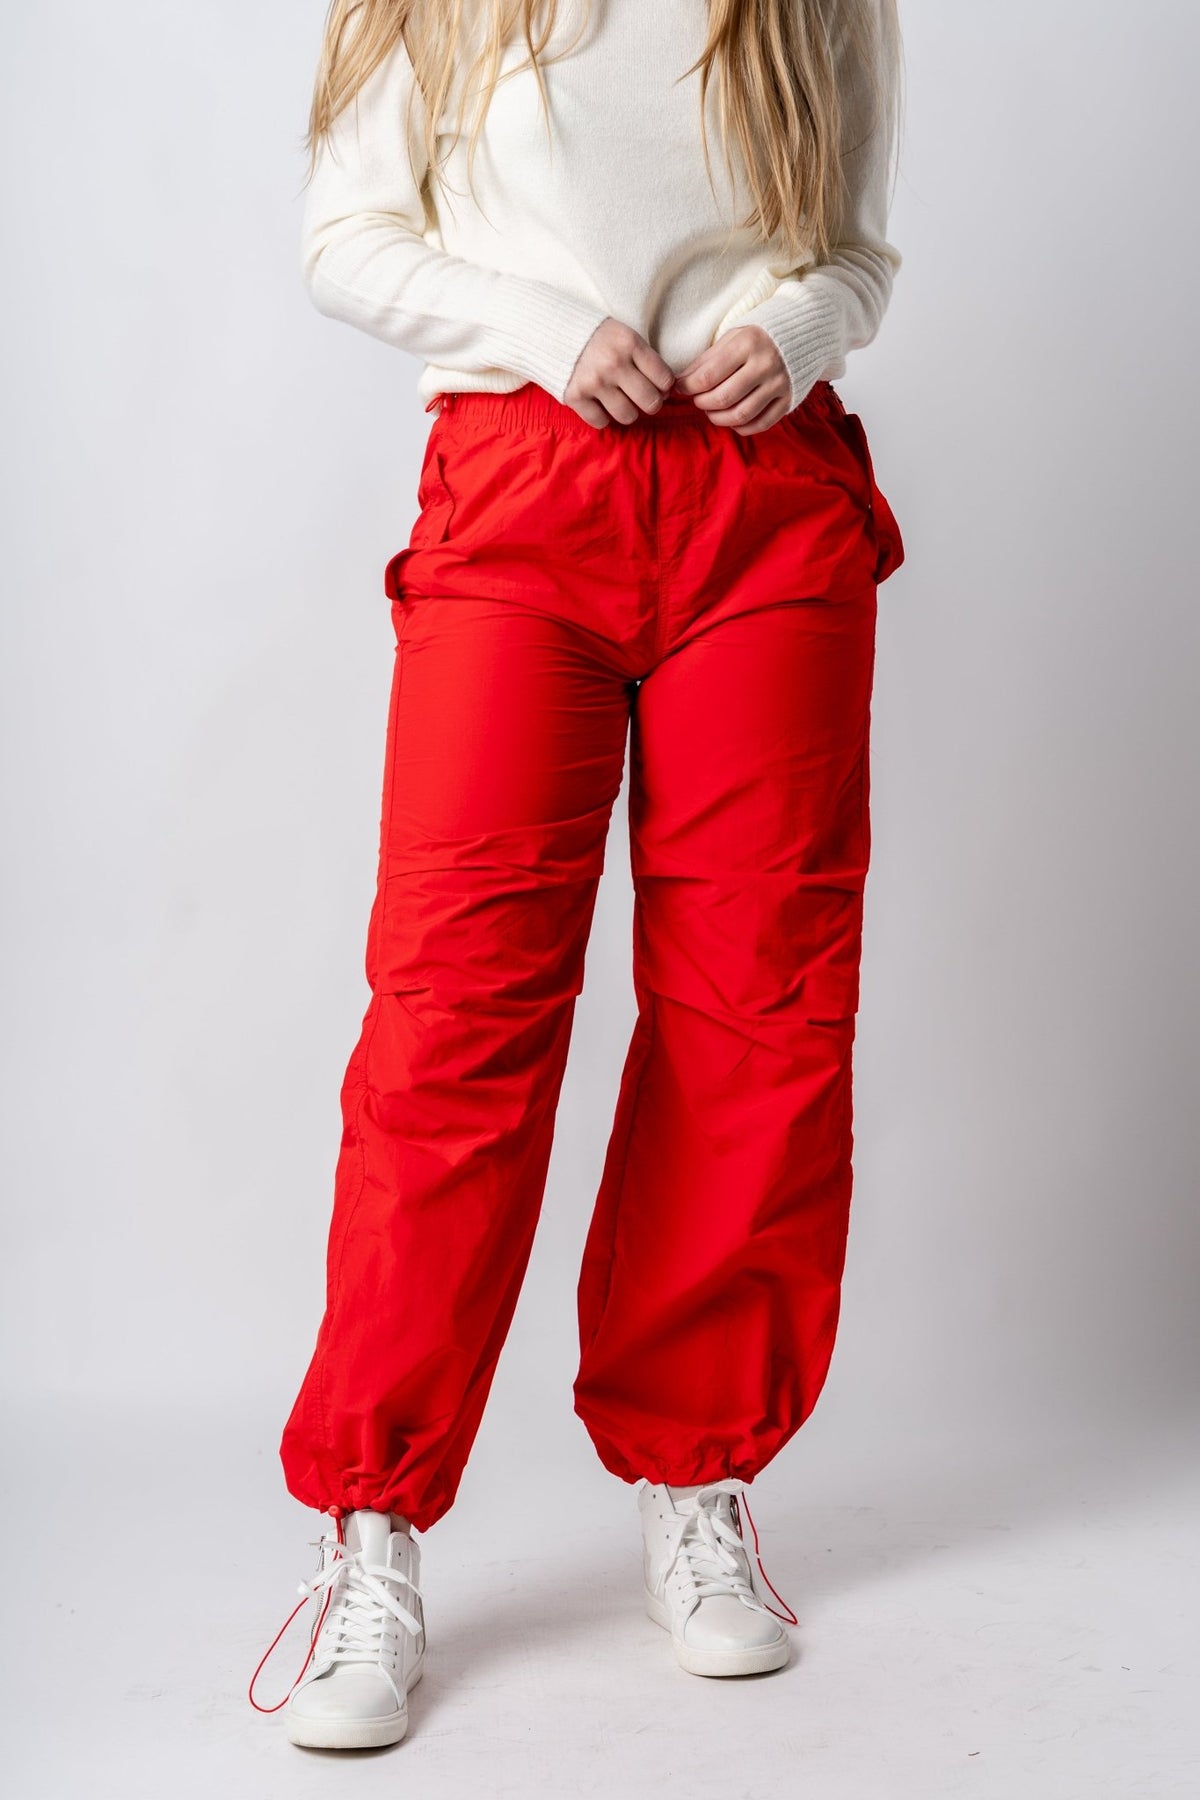 Ruched cargo pants tomato red - Trendy Holiday Apparel at Lush Fashion Lounge Boutique in Oklahoma City